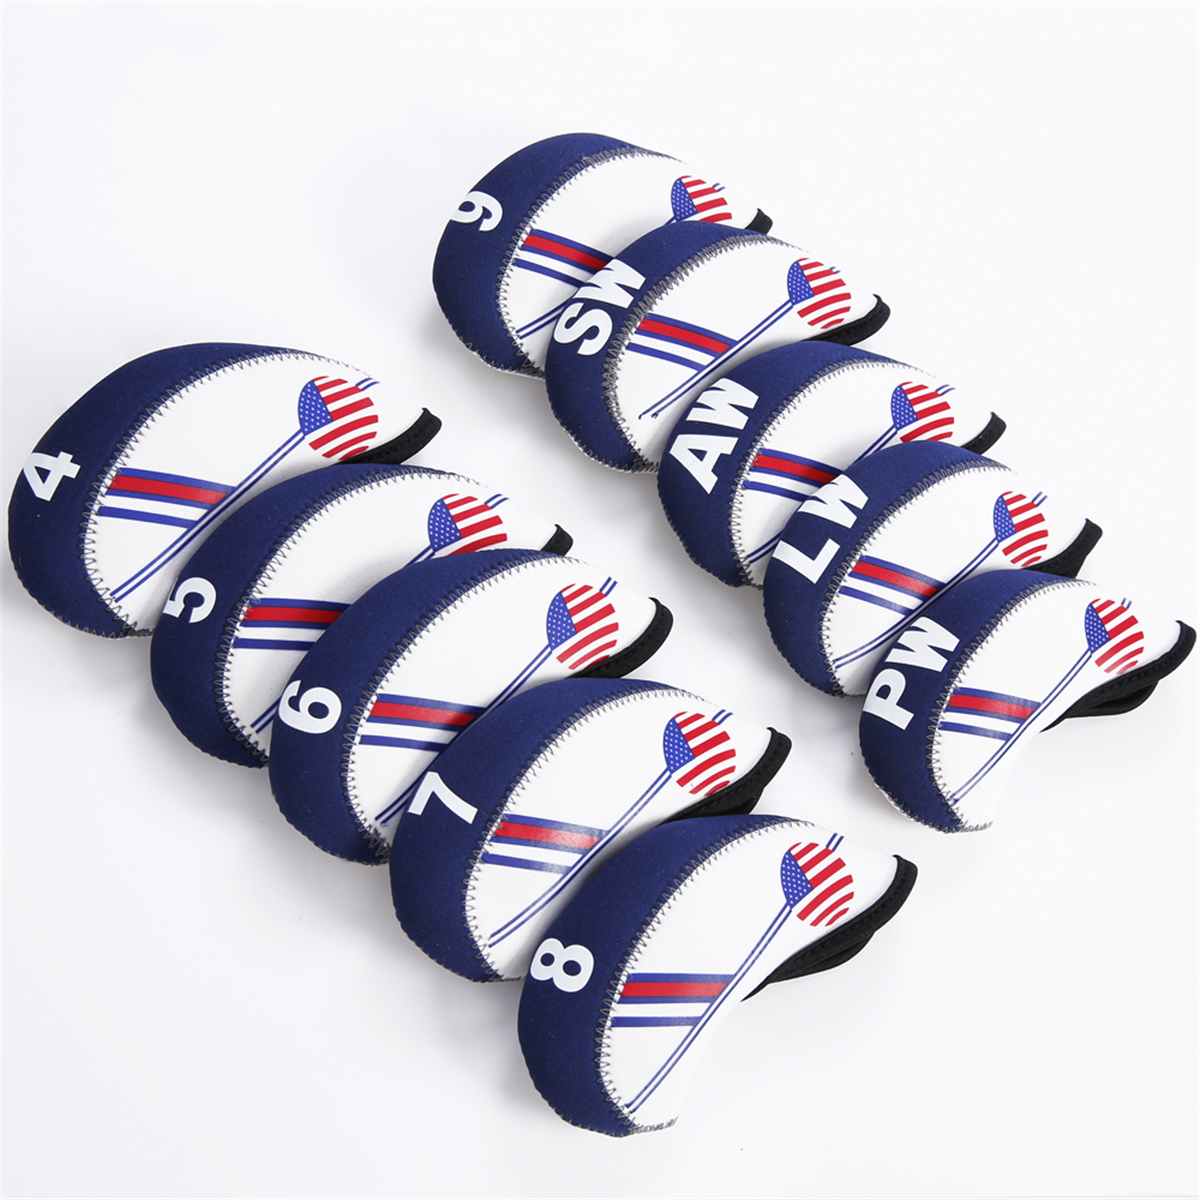 10Pcsset-Golf-Club-Iron-Head-Cover-Headcover-Neoprene-Protect-Set-National-Flag-Headcover-1469336-7